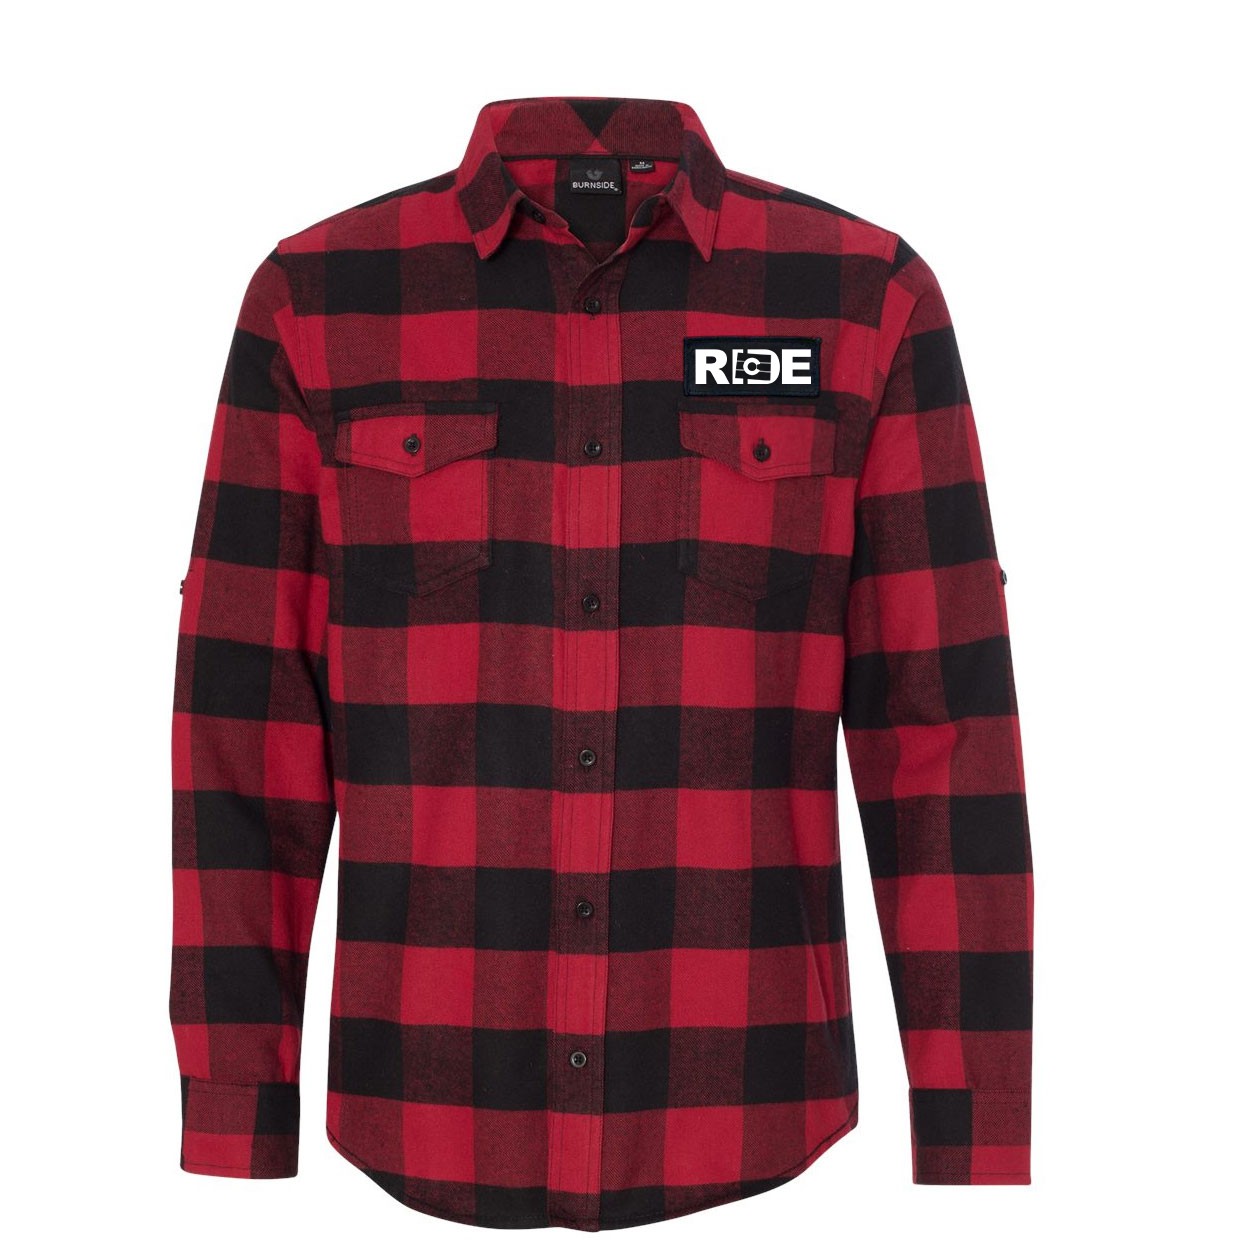 Ride Colorado Classic Unisex Long Sleeve Woven Patch Flannel Shirt Red/Black Buffalo (White Logo)